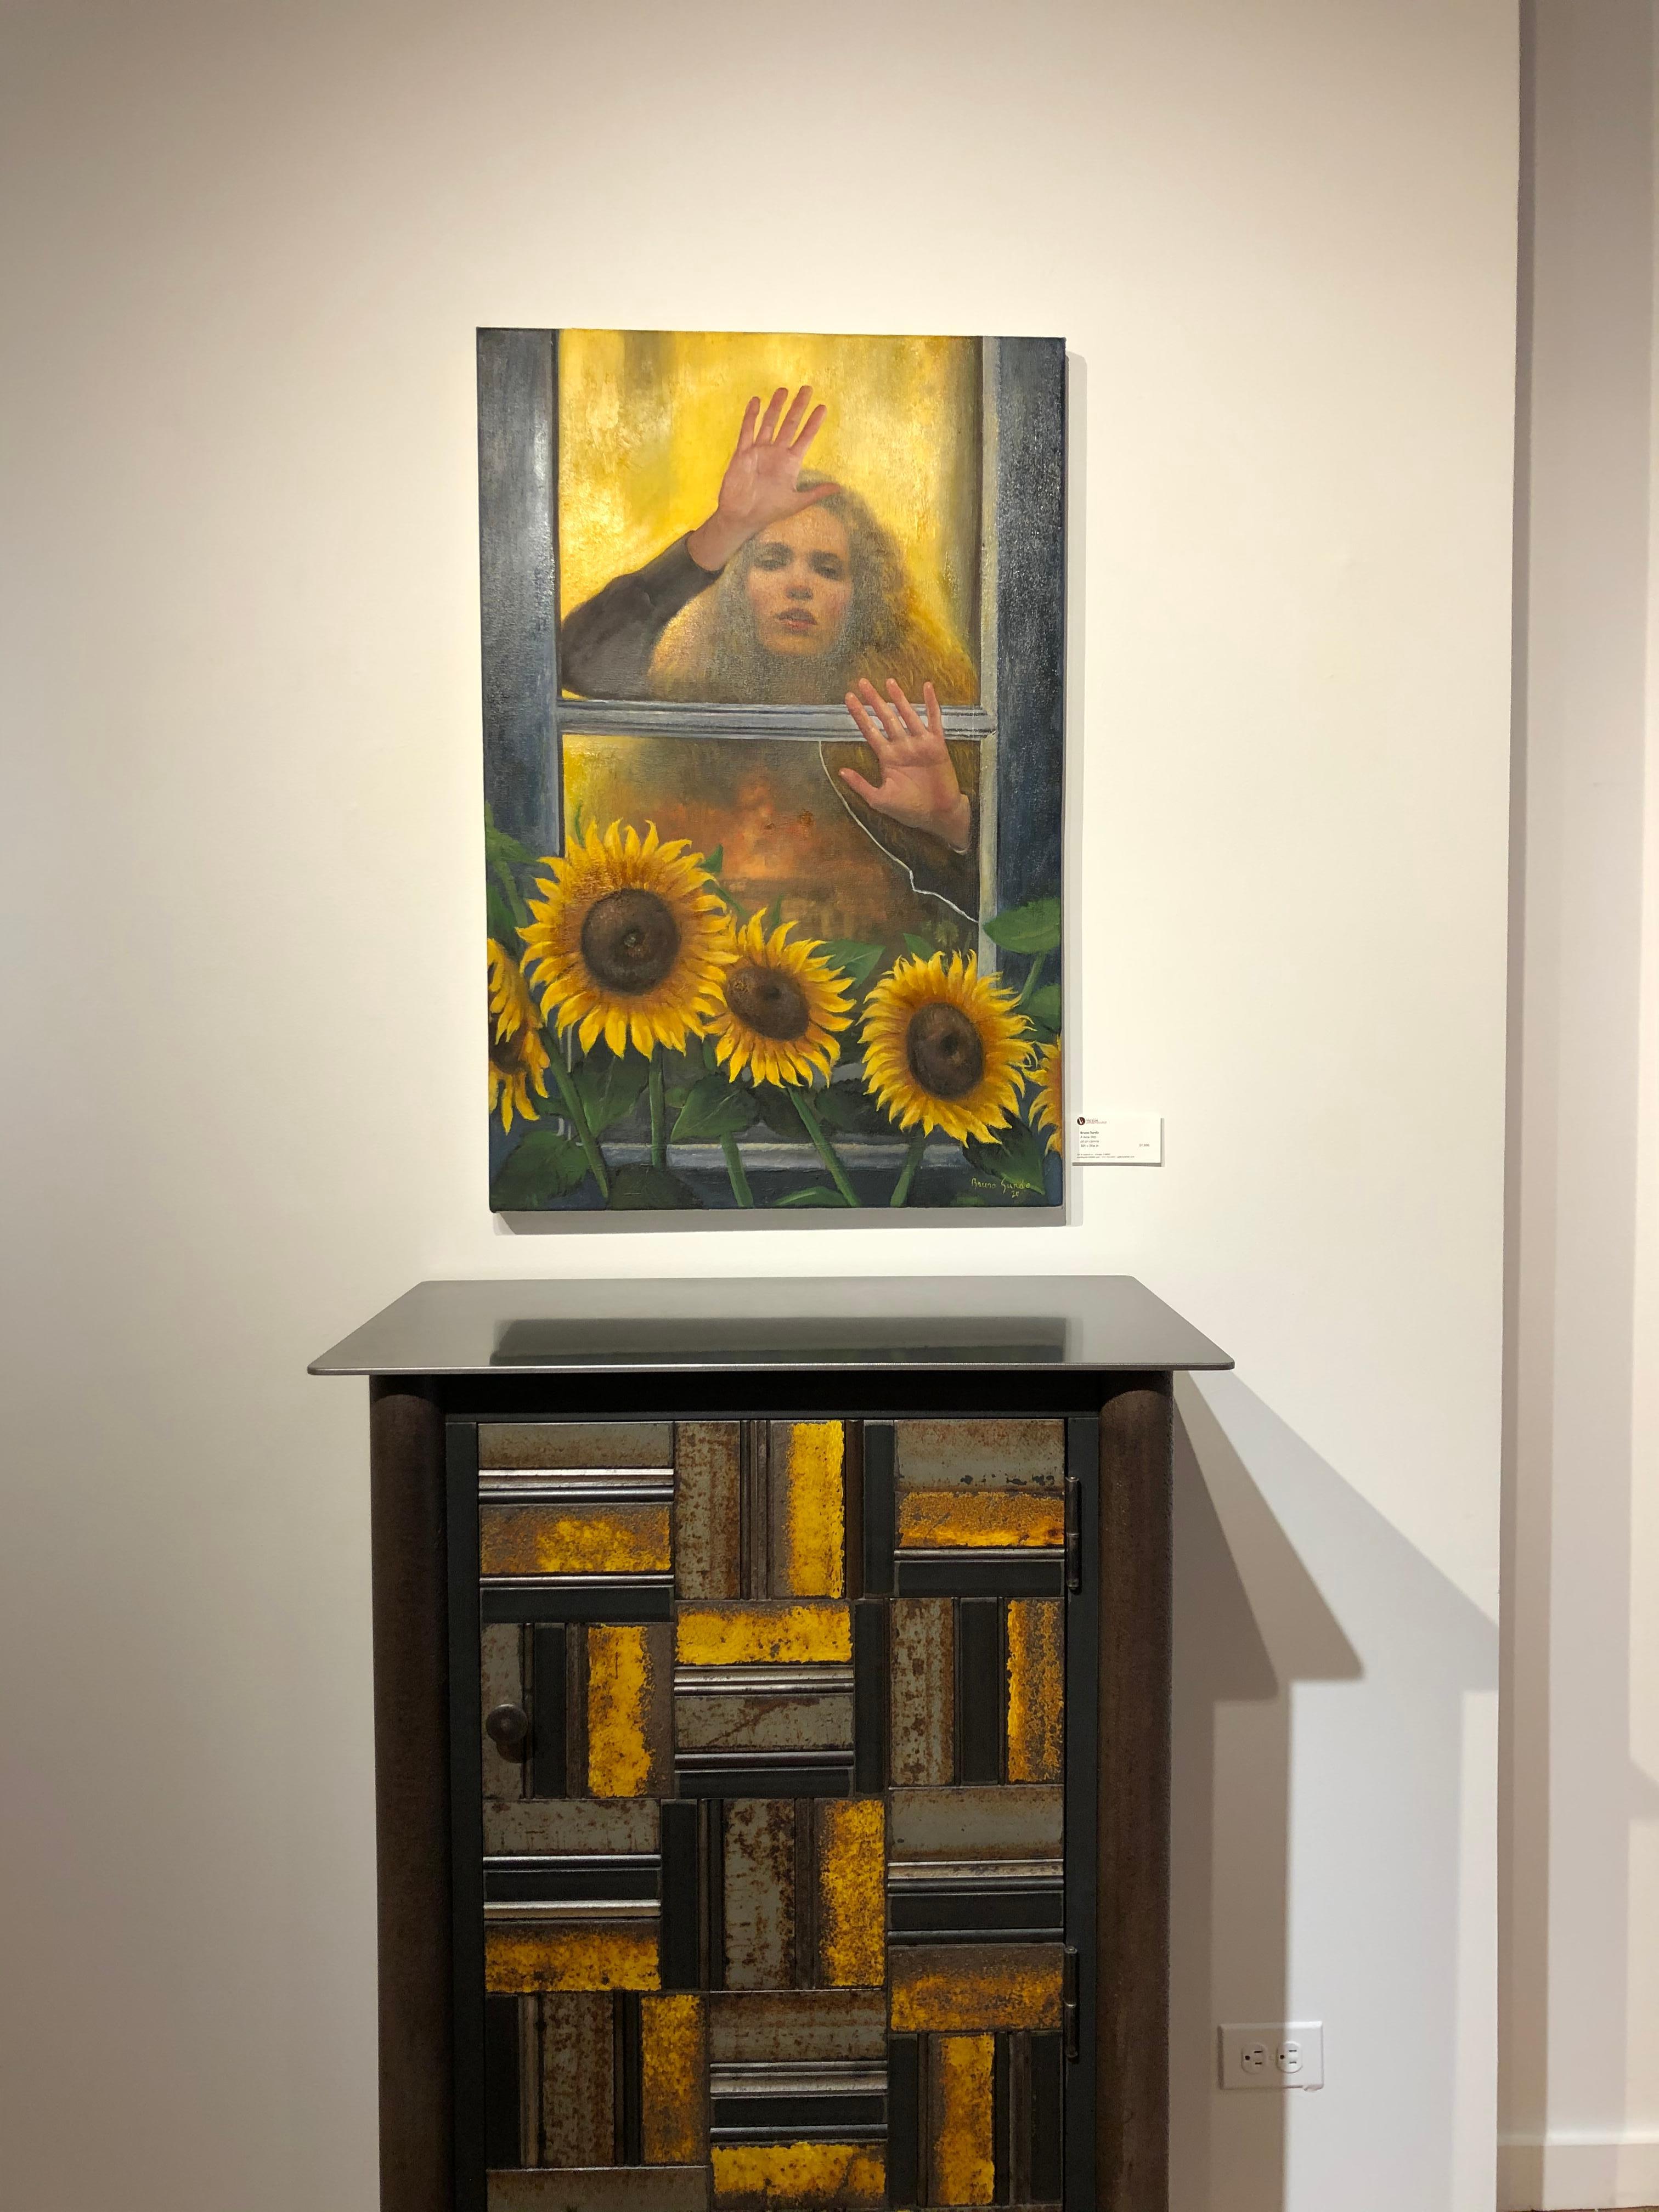 A New Day, Woman Behind Window with Sun Flowers in the Foreground, Oil on Canvas - Contemporary Painting by Bruno Surdo